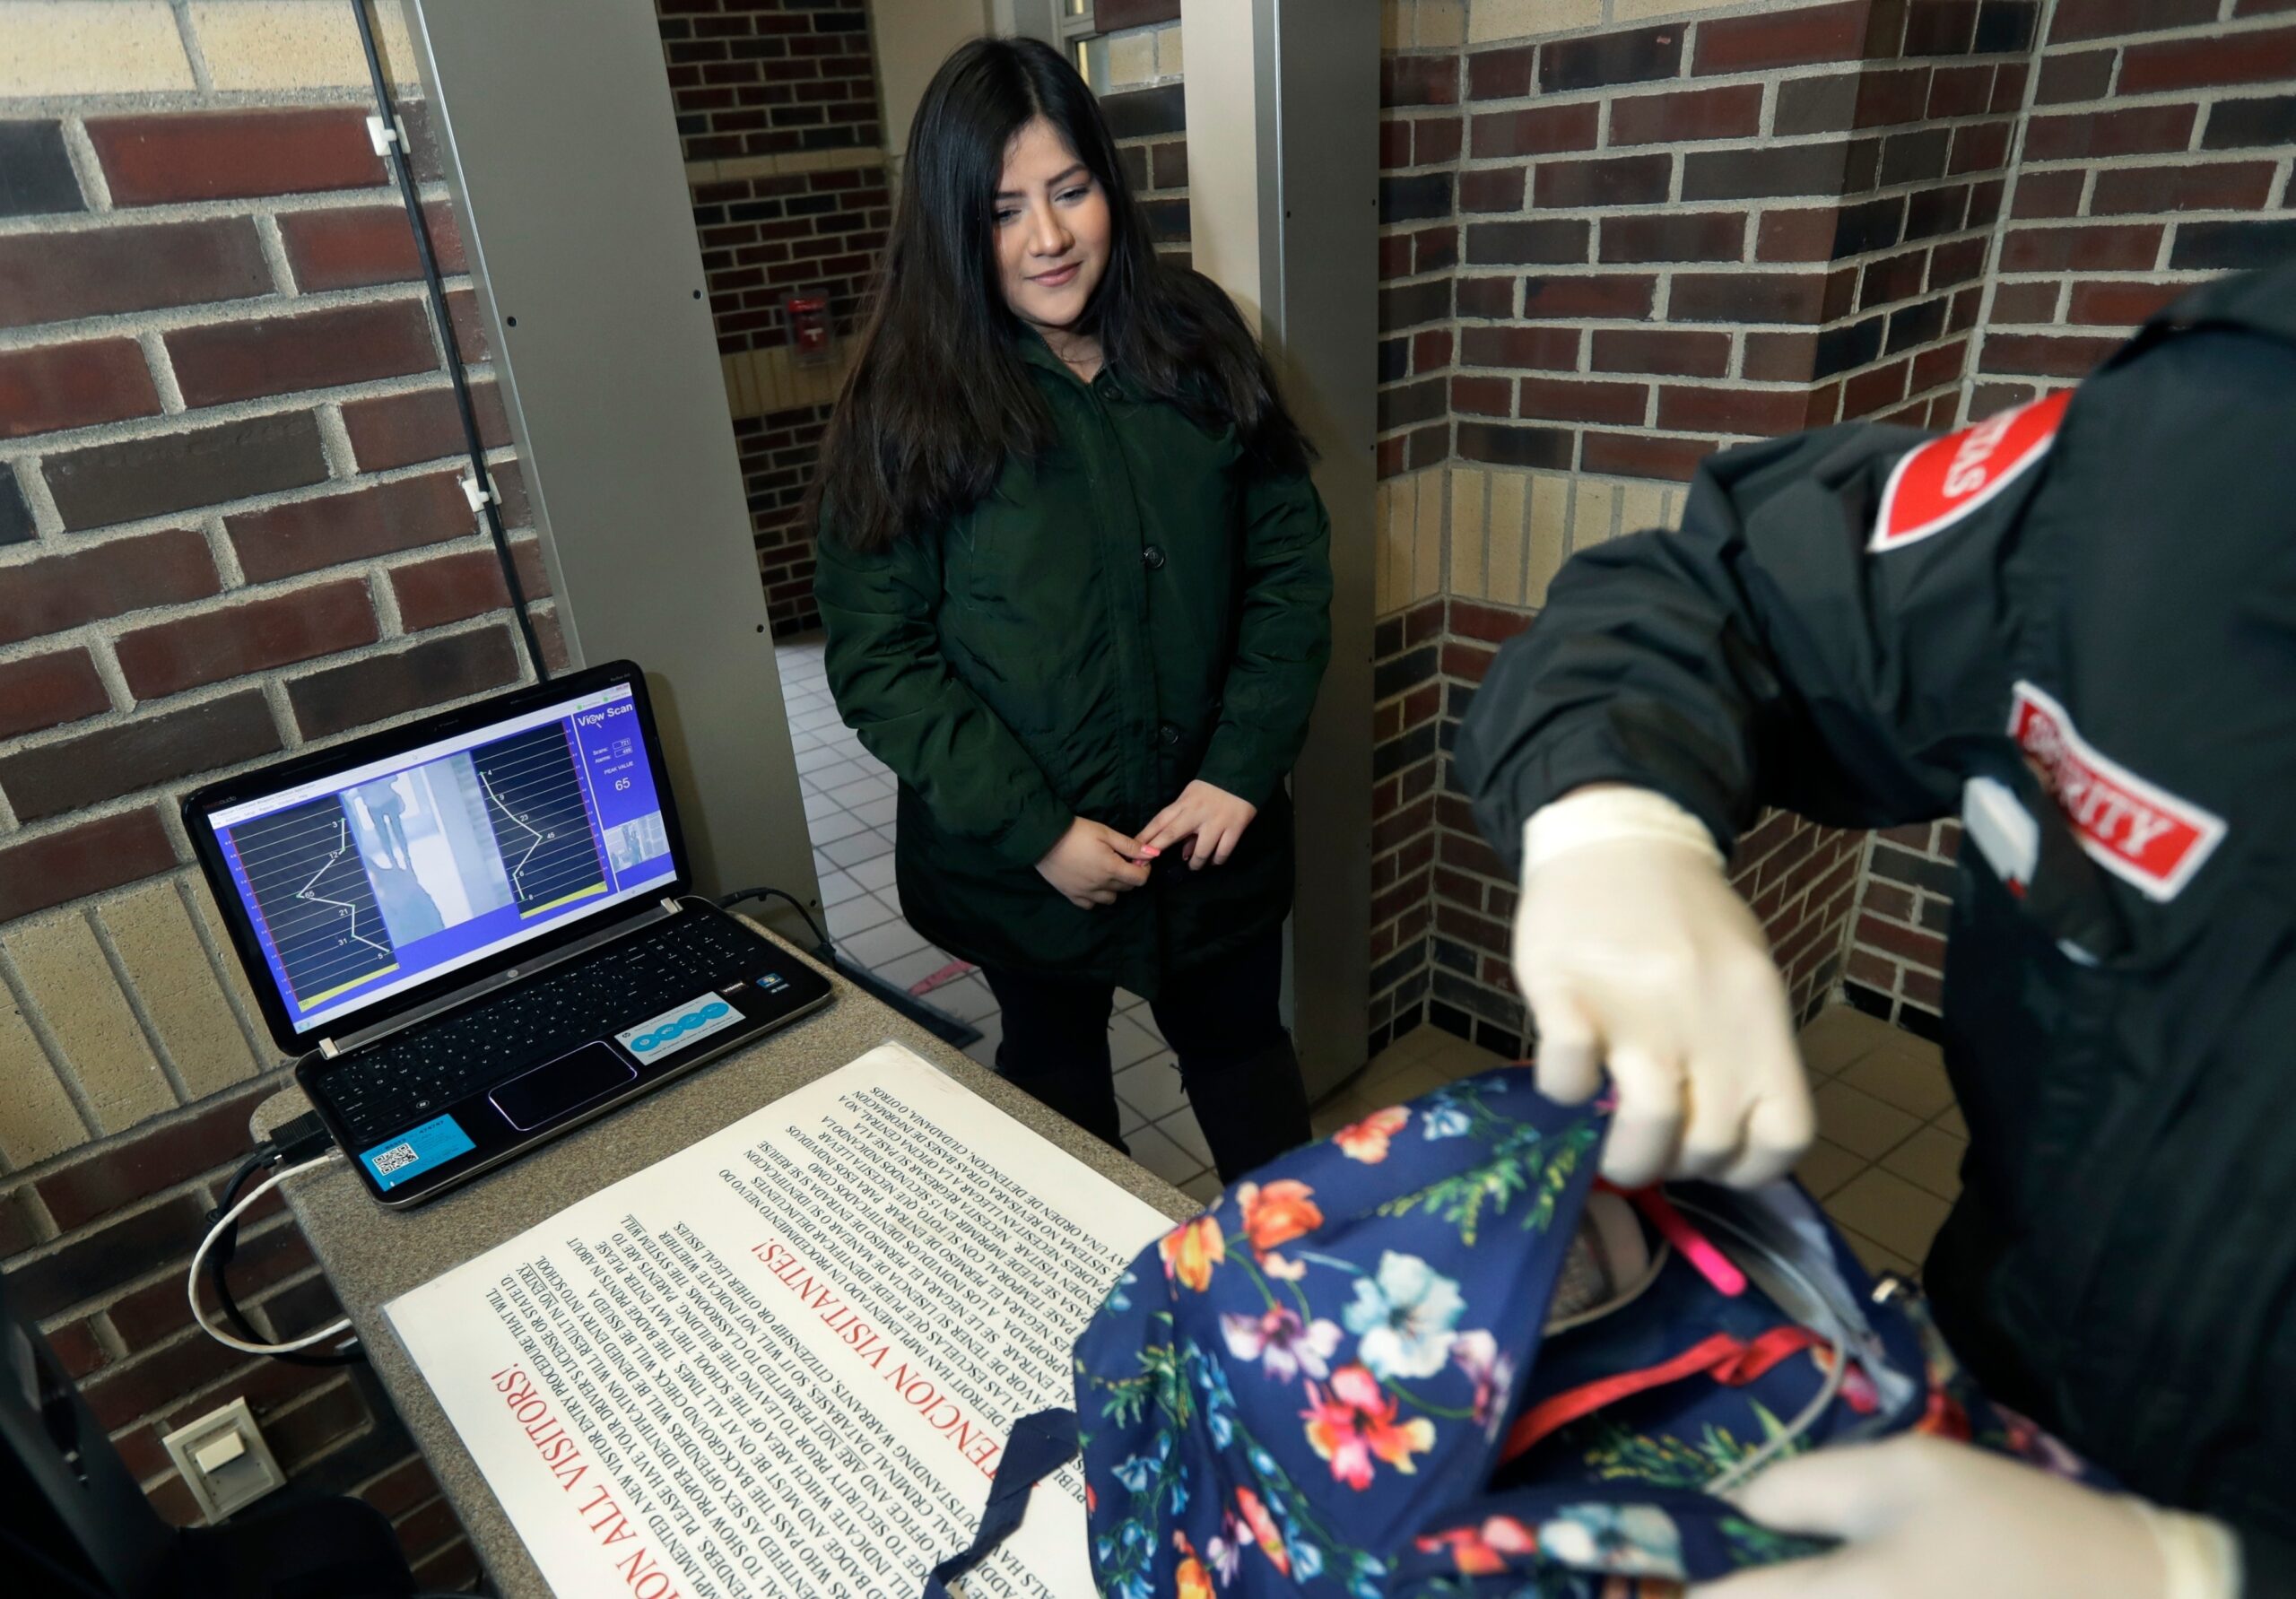 A student gets her bag checked at a metal detector